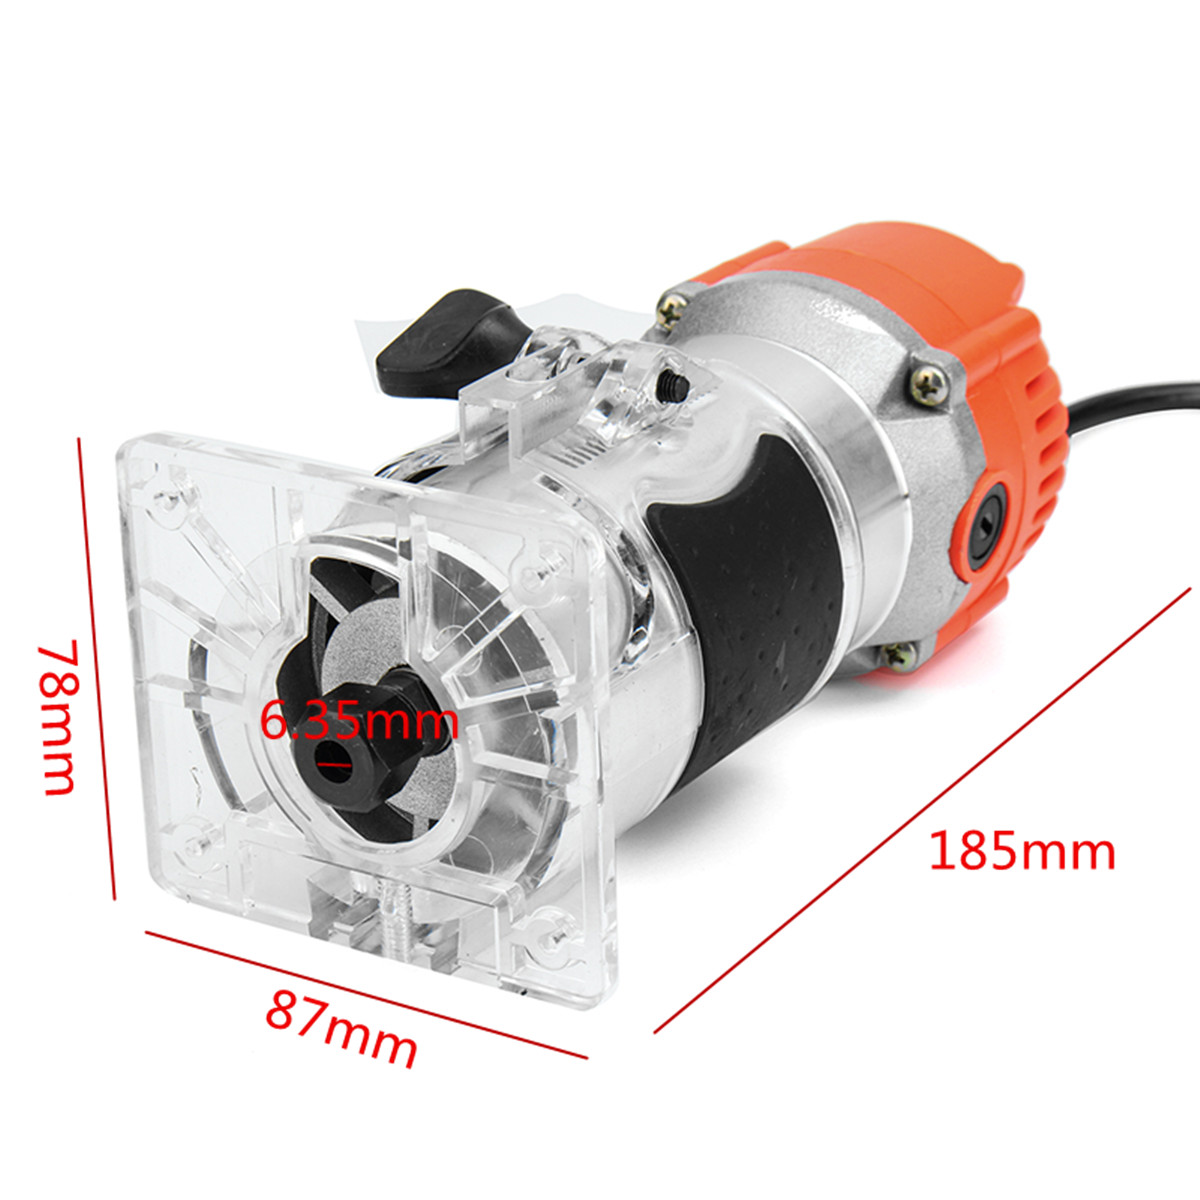 110V220V-680W-Trim-Router-Edge-Woodworking-Wood-Clean-Cuts-Power-Tool-Set-33000RPM-with-Box-1245528-4